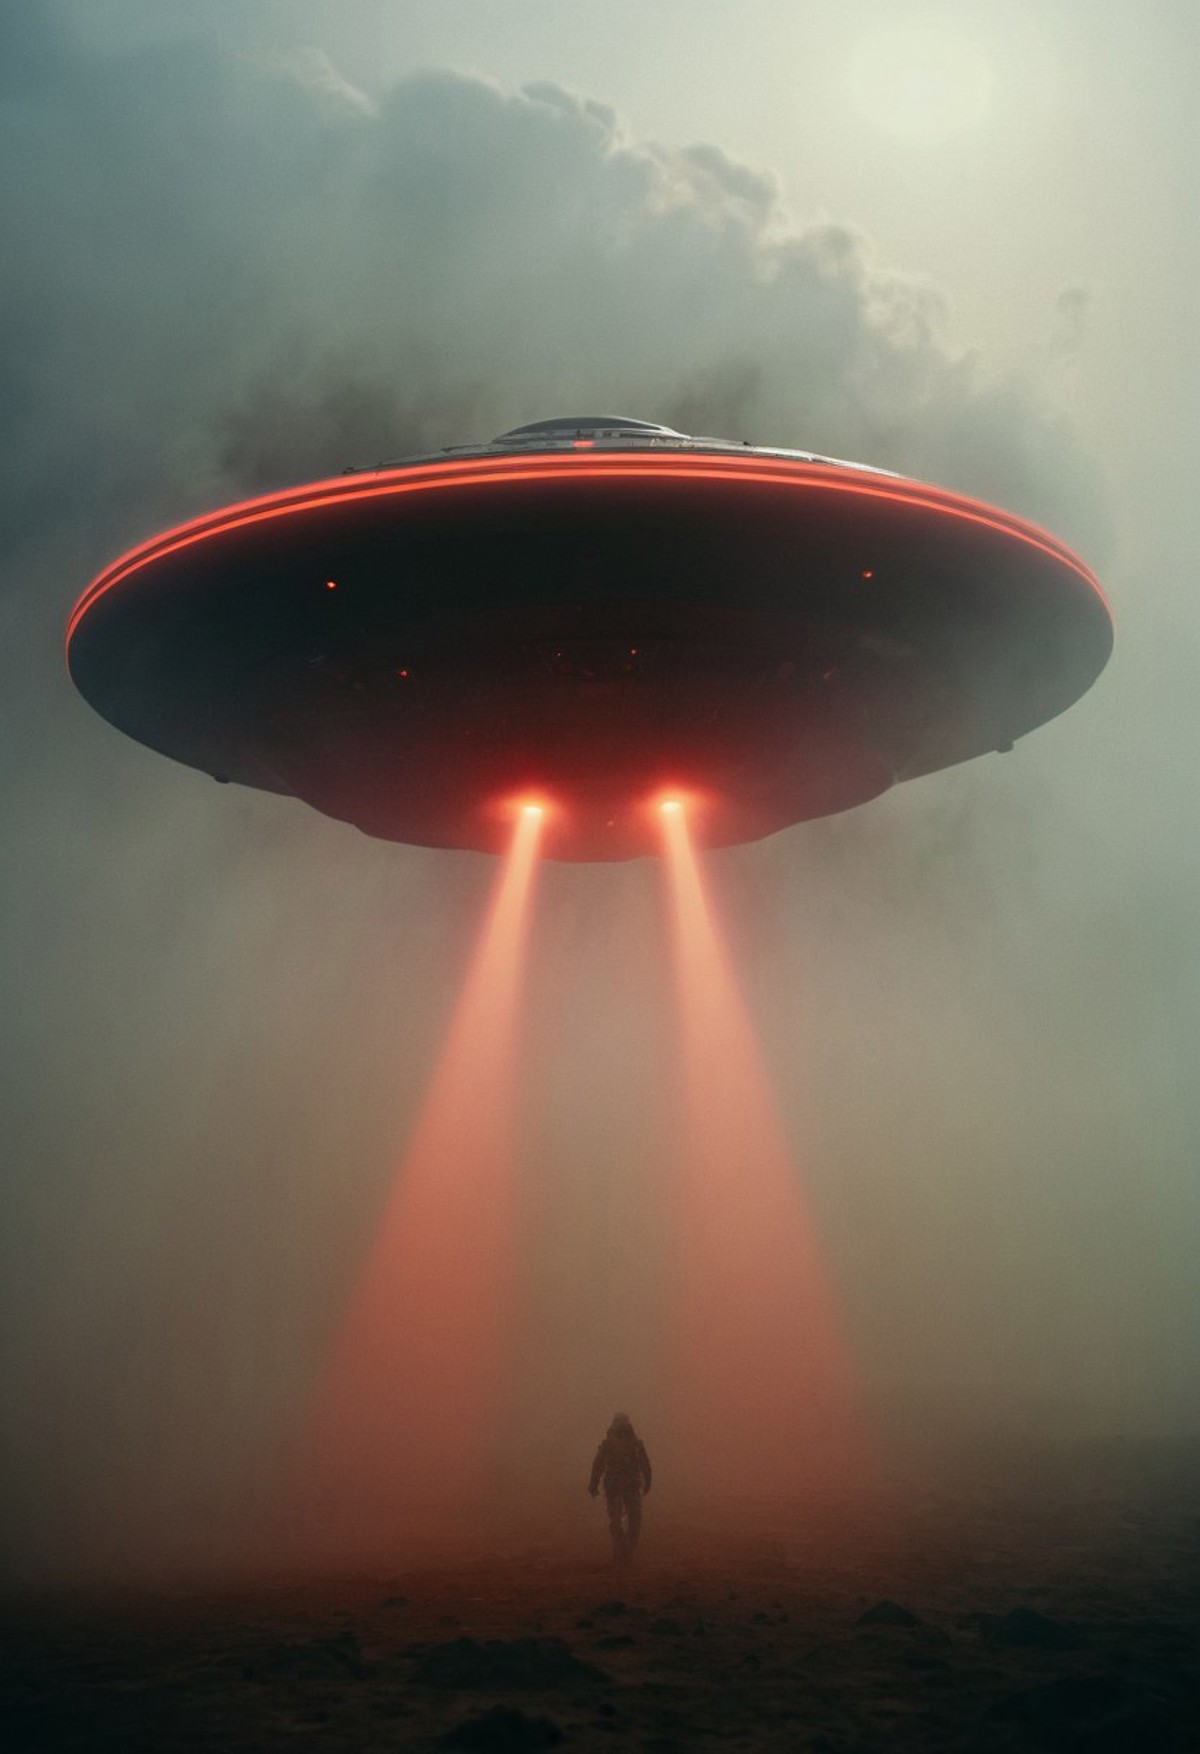 A large, saucer-shaped flying object hovering in a misty atmosphere. The craft has a prominent red lights emanating from its underside, casting down two distinct beams of light onto the ground below. Underneath it, there is a person seemingly walking towards the UFO. The setting appears to be an open landscape shrouded in fog, which adds to the eerie and mysterious quality of the scene. 